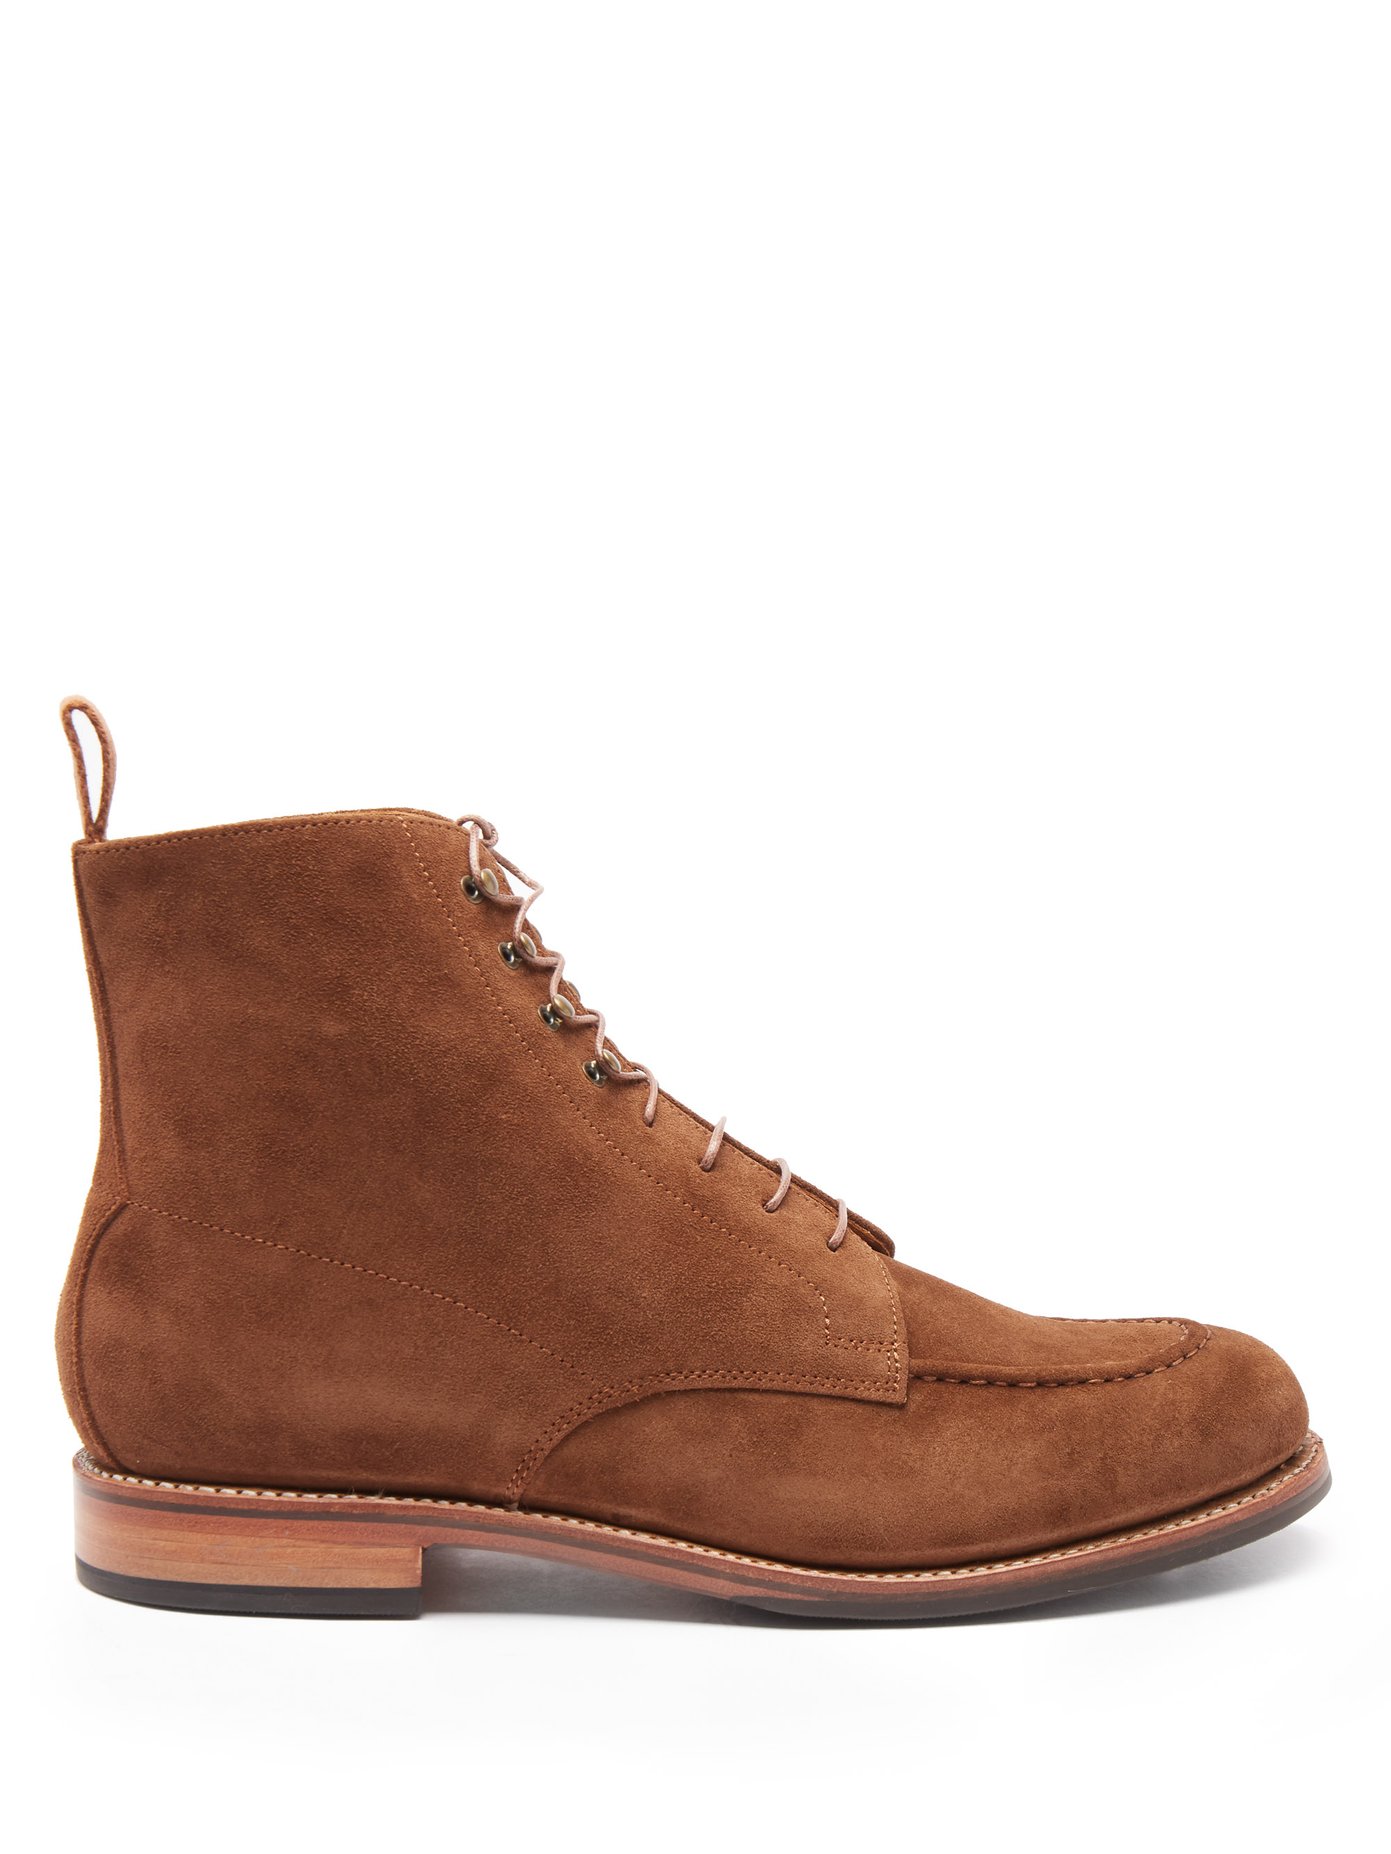 grenson brown boots